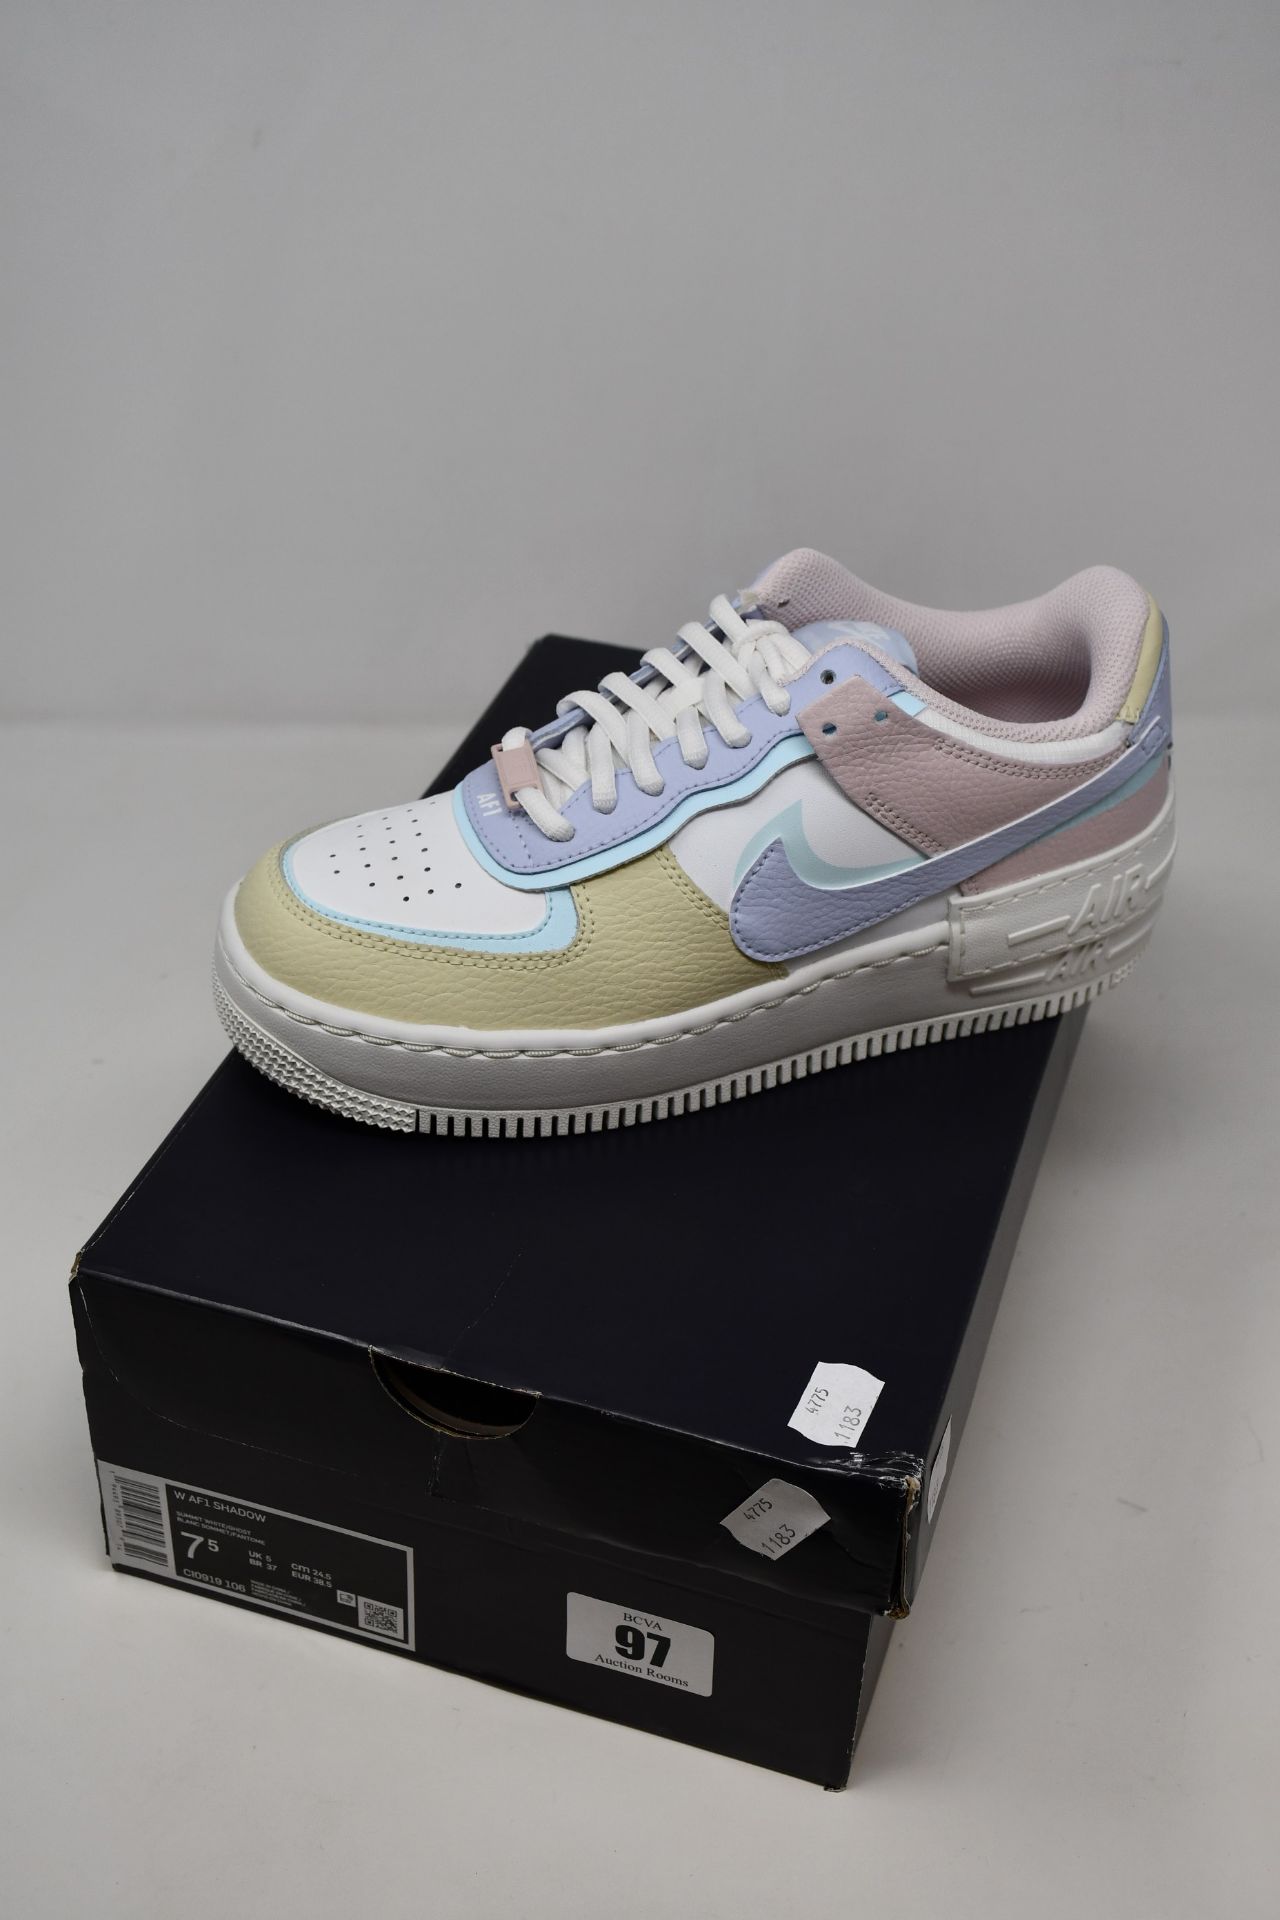 A pair of women's as new Nike Air Force 1 Shadow trainers (UK 5).